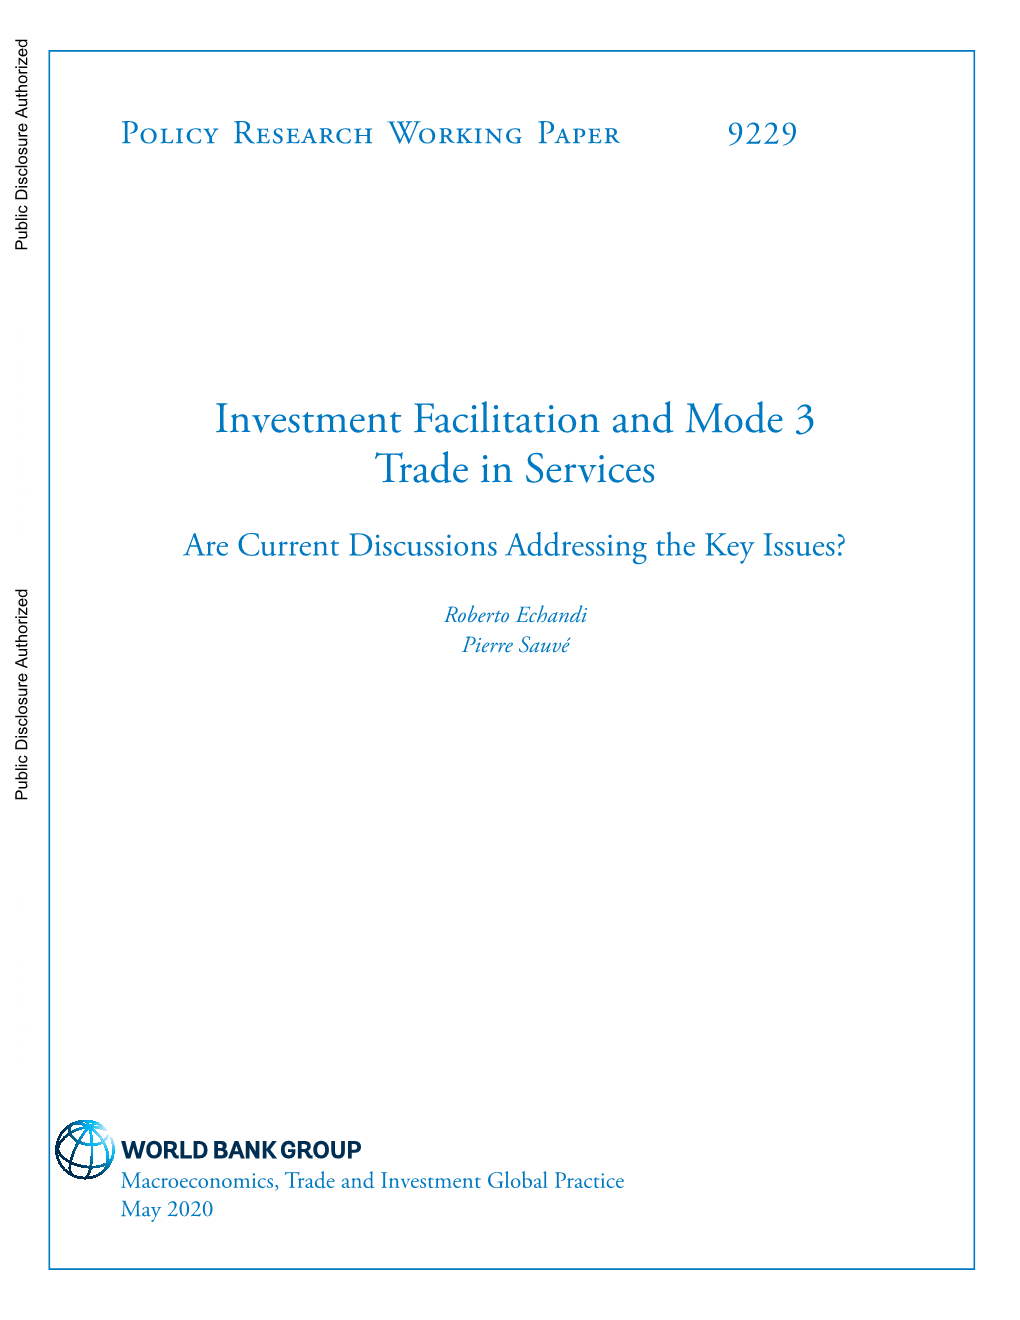 Investment Facilitation and Mode 3 Trade in Services: Are Current Discussions Addressing the Key Issues?